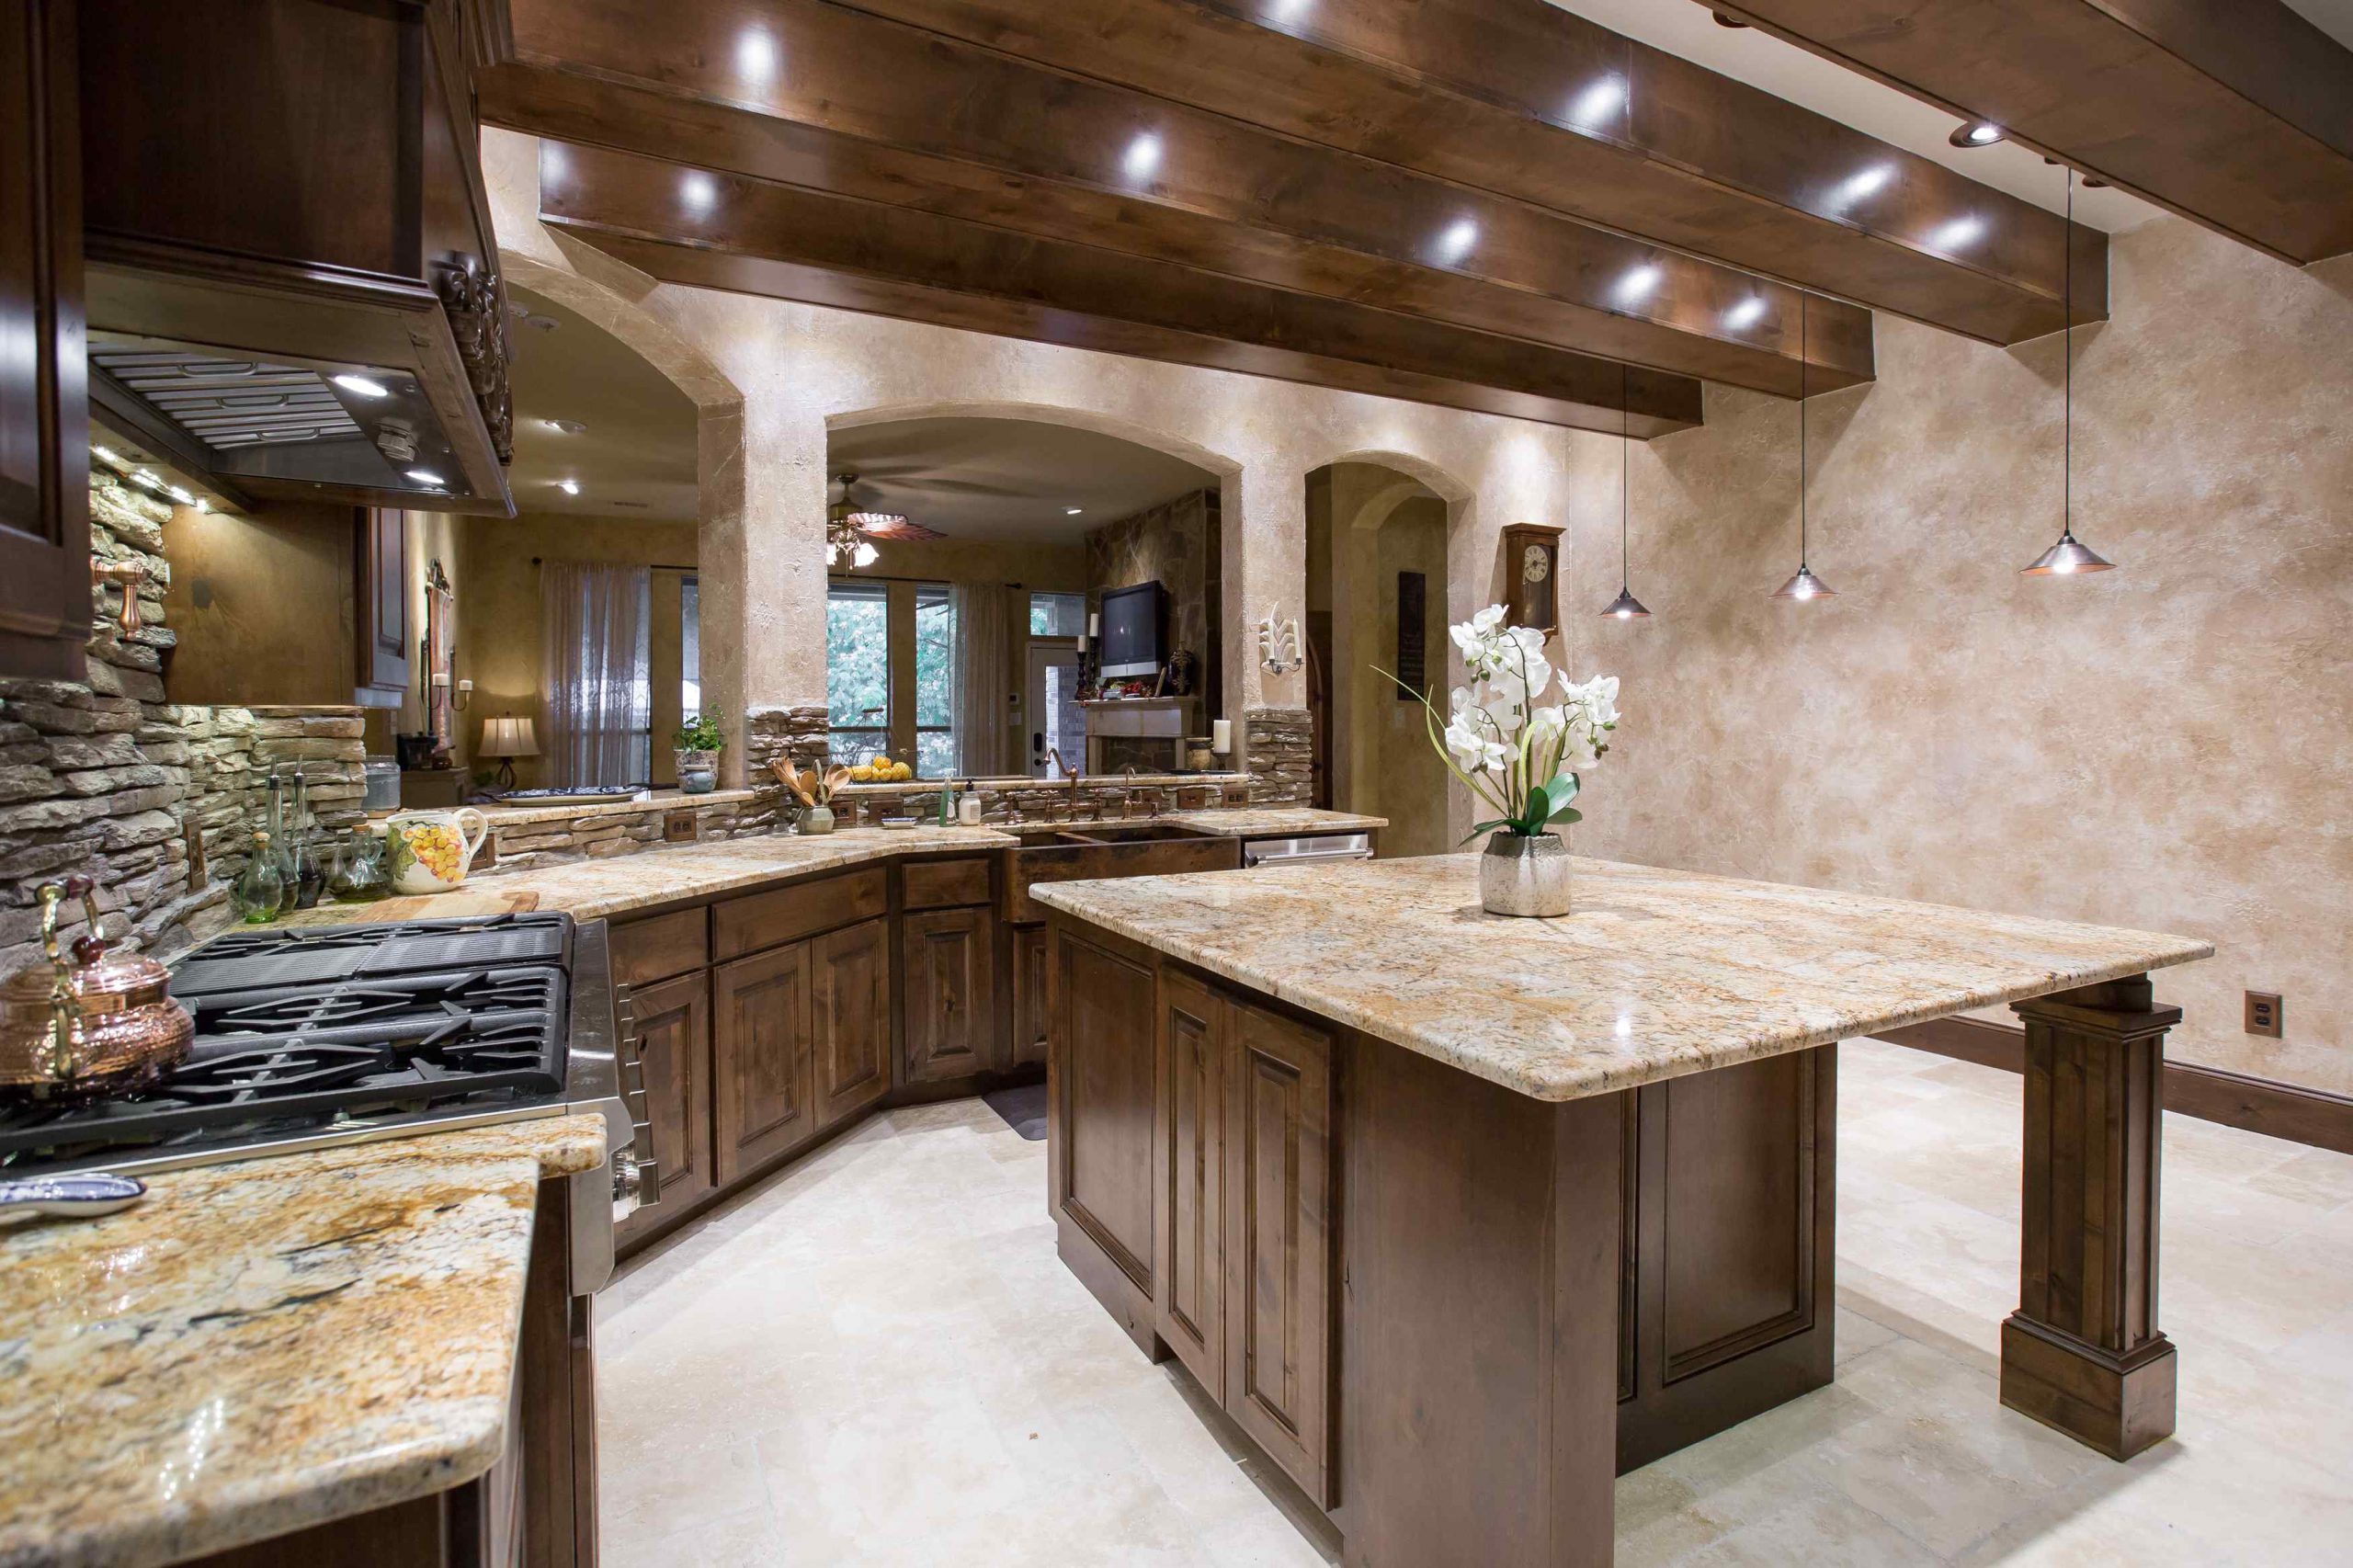 Kitchen Remodeling Colleyville TX, Kitchen Remodeling Company in Colleyville with great reviews, Kitchen Remodeling near me in colleyville